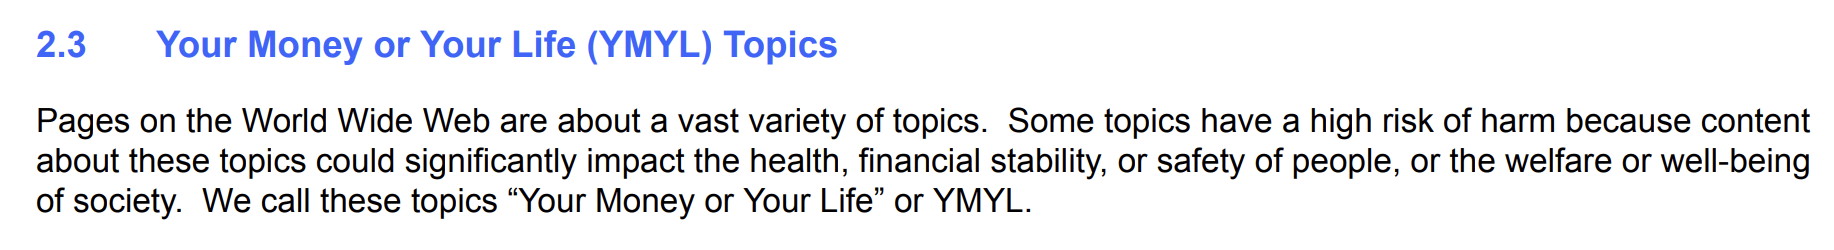 YMYL definition, via Google Search Quality Evaluator Guidelines